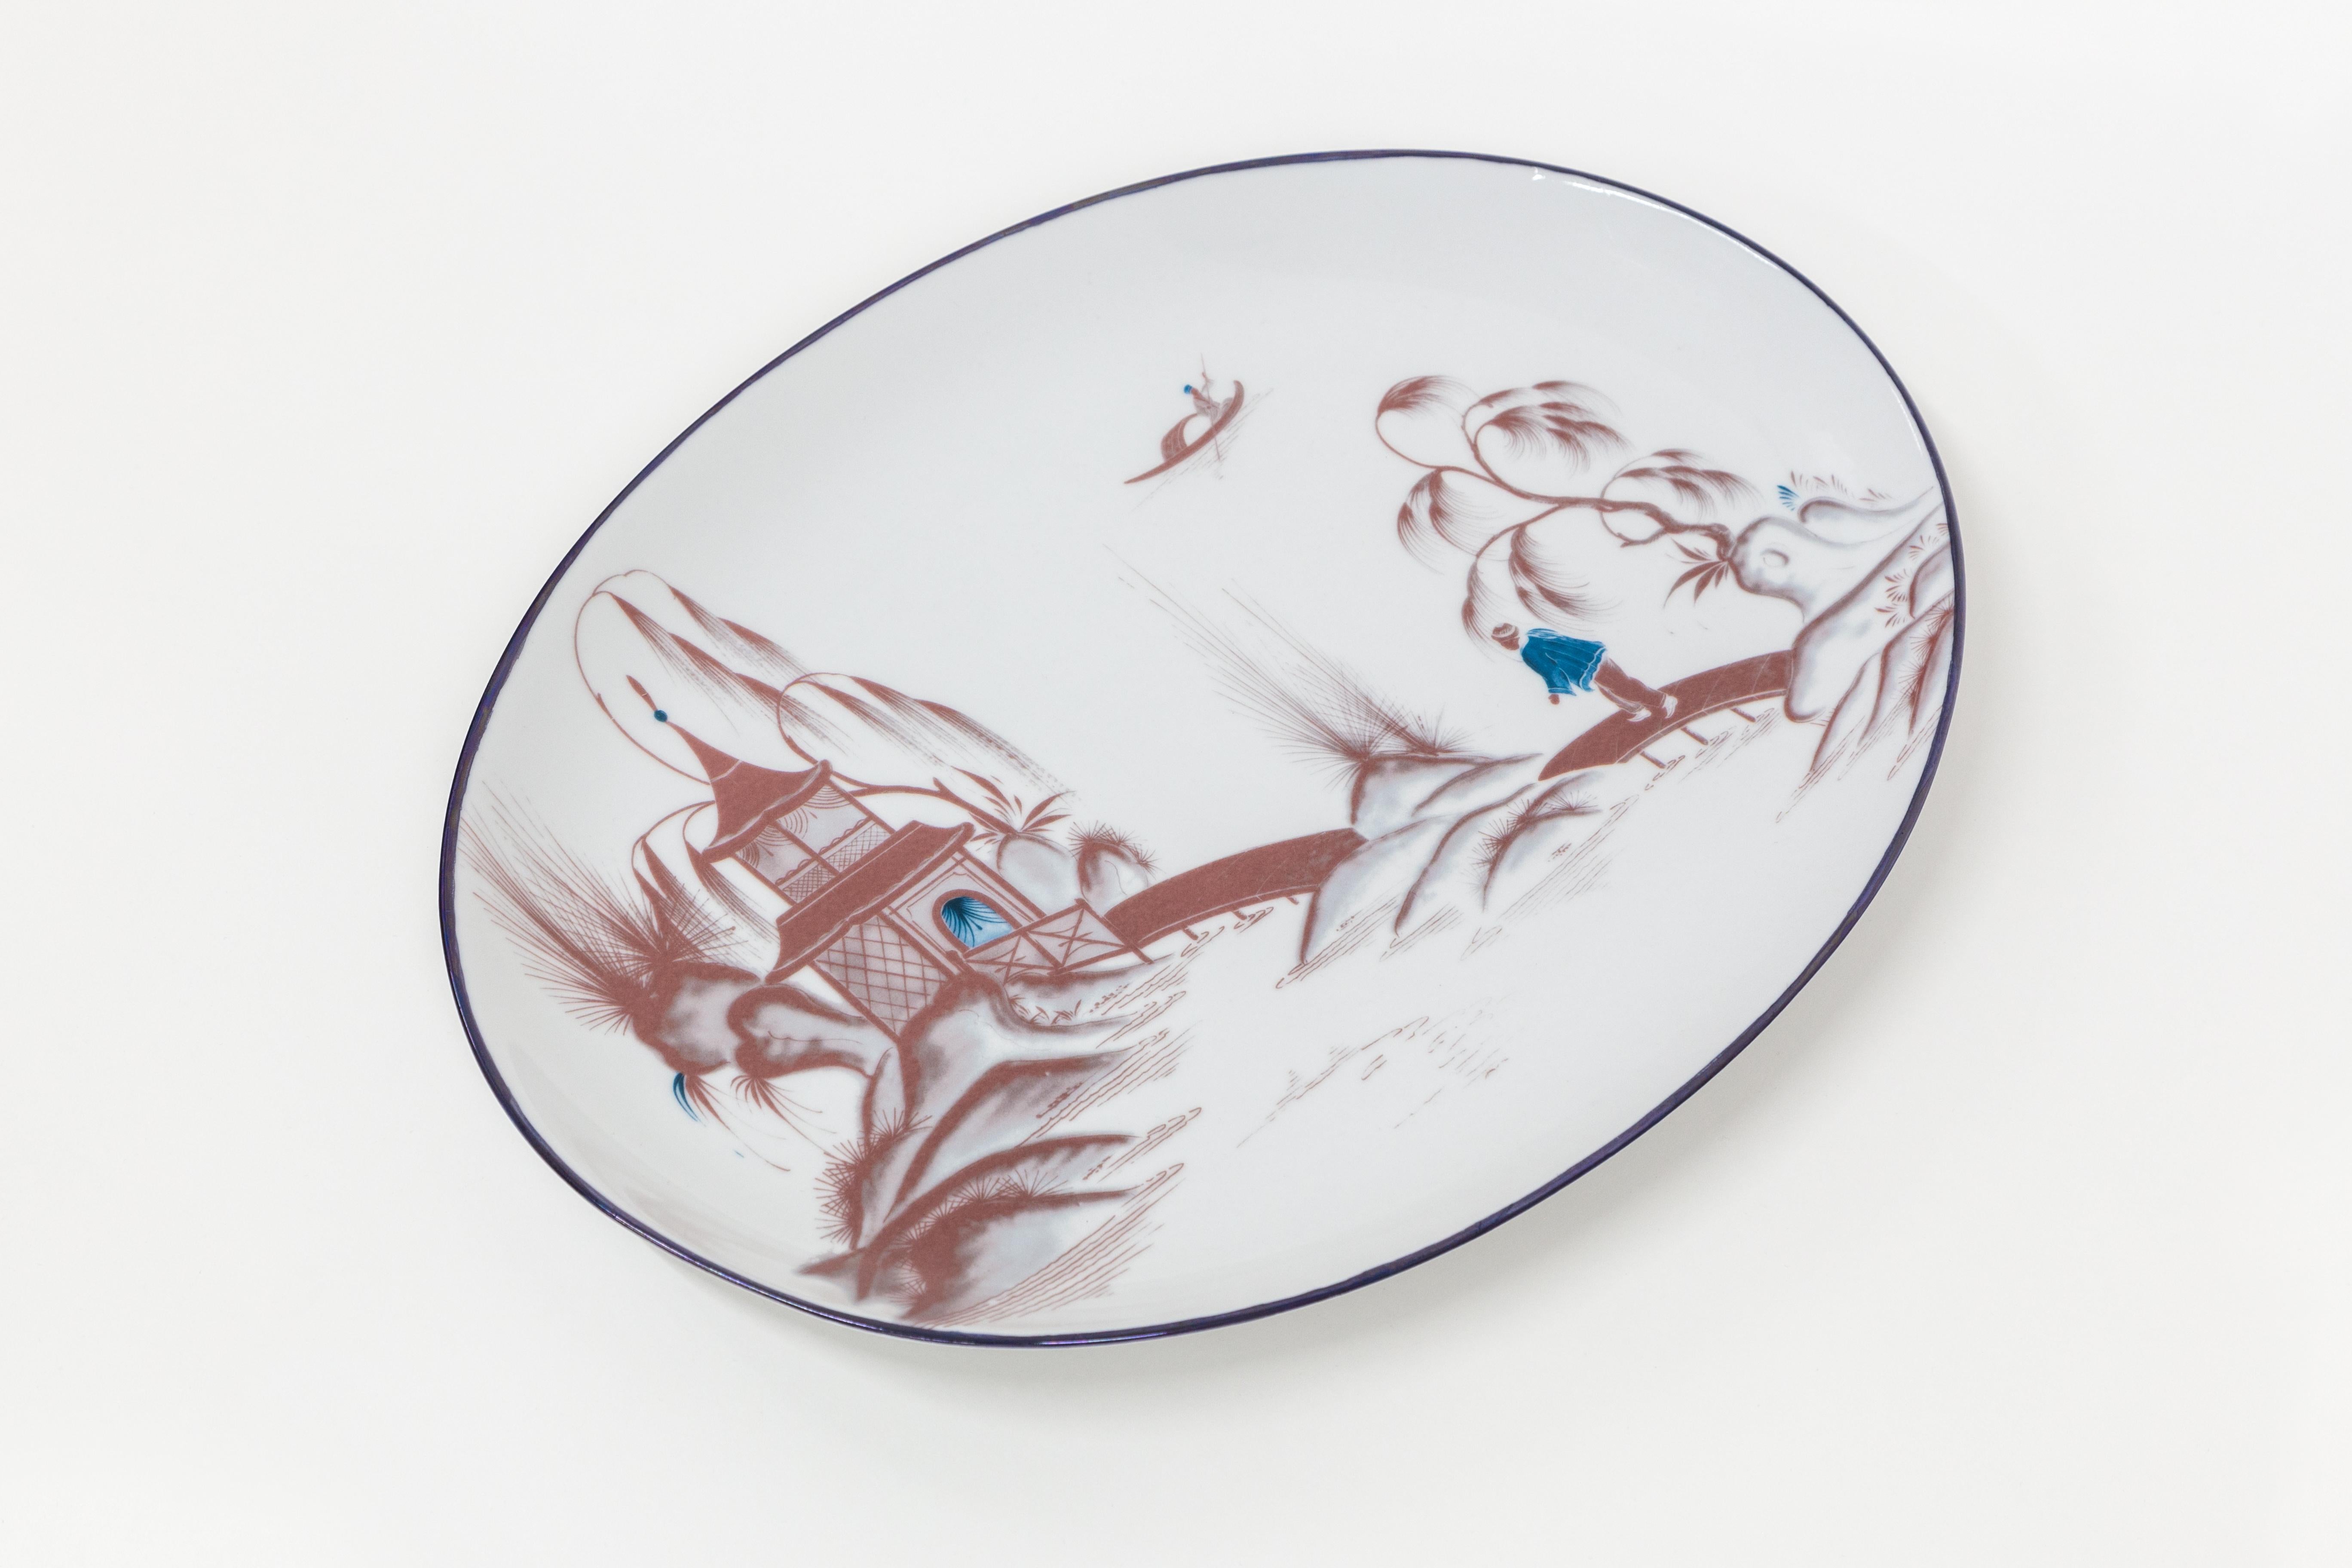 This 28x38cm oval tray is part of Natsumi collection by Grand Tour by Vito Nesta. The classic and versatile shape is a must-have inside any home to embellish a table or beautify a wall. The star of this tray is a Japanese jumper lying on a pond.The